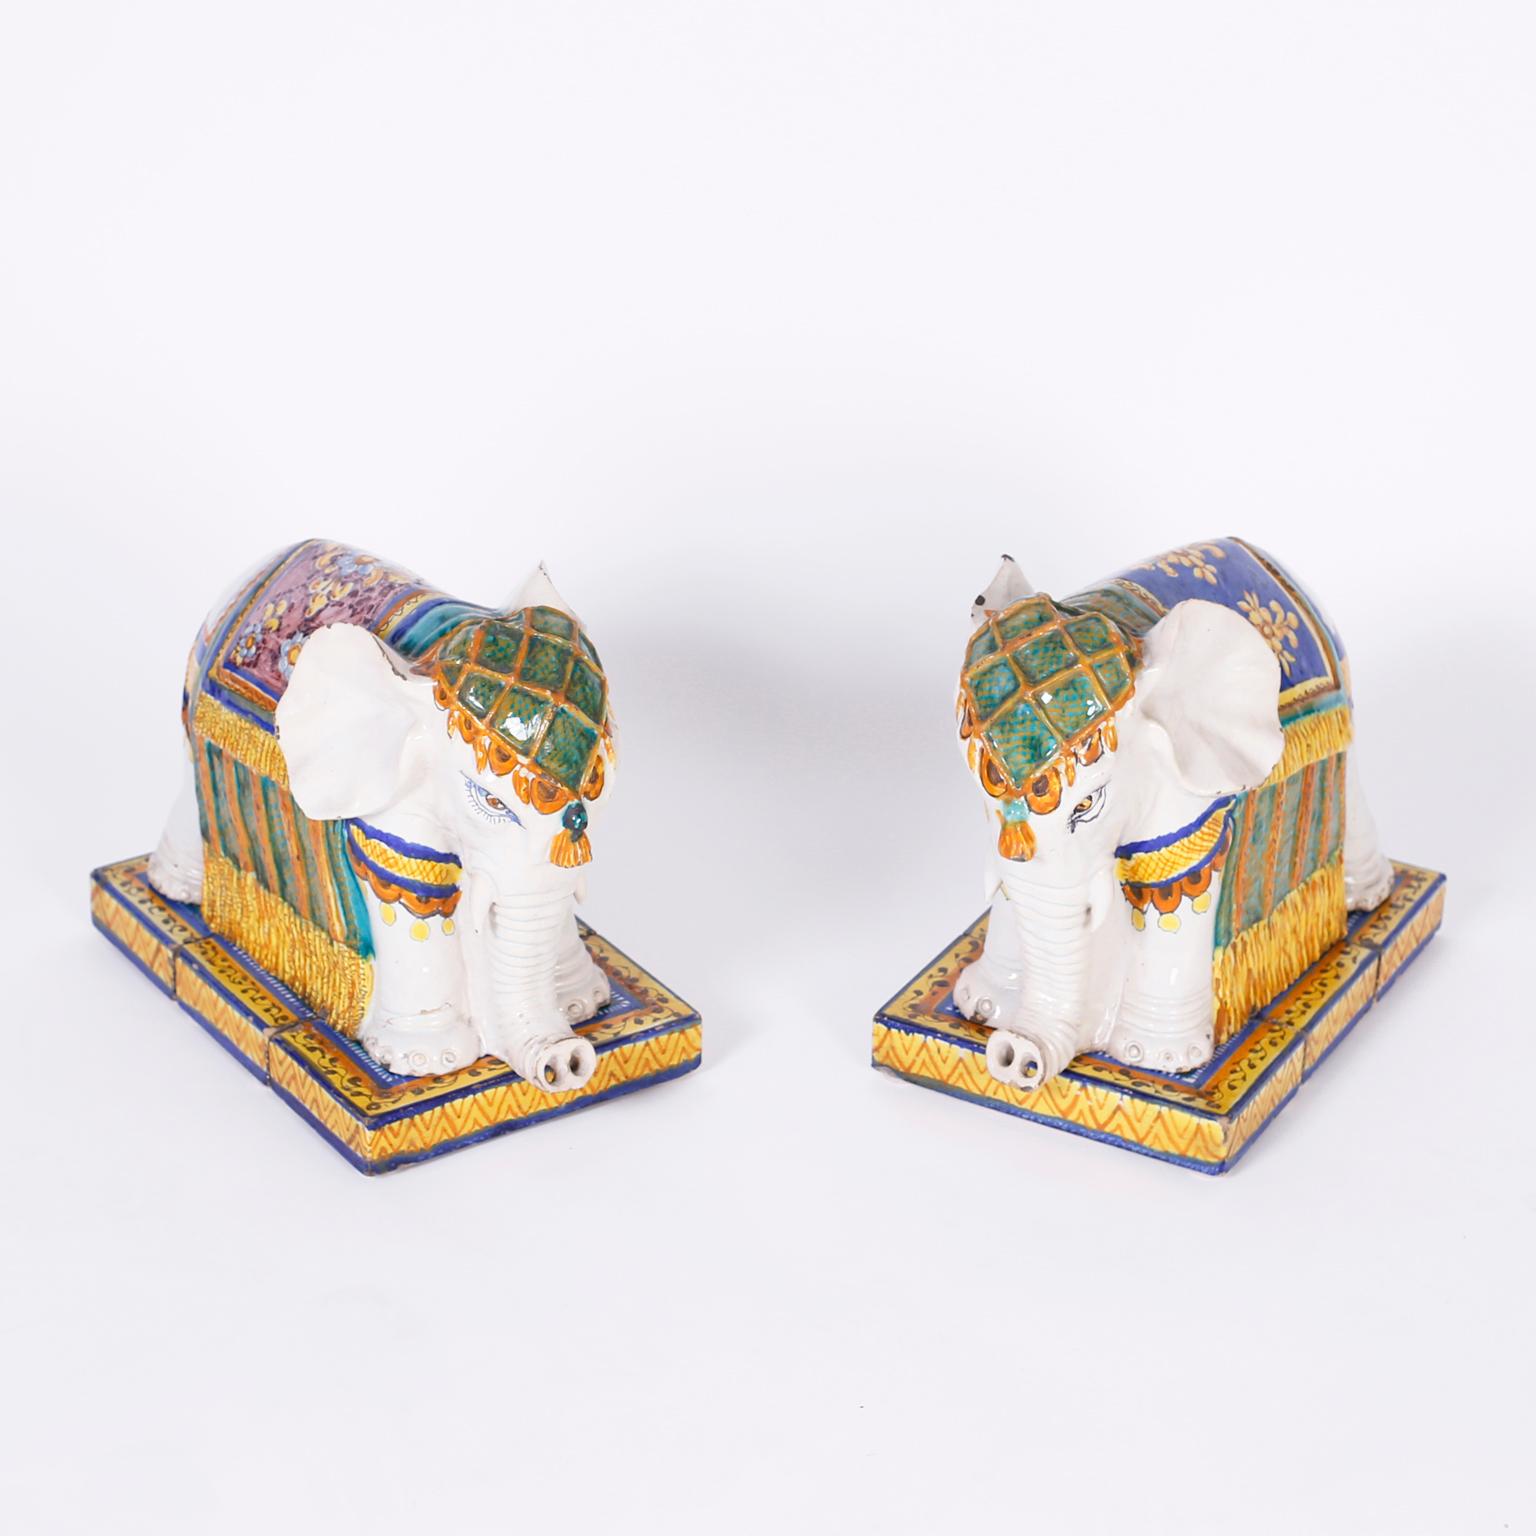 Terracotta elephants decorated and glazed sitting on three piece bases. Signed inside Casa Gonzales.